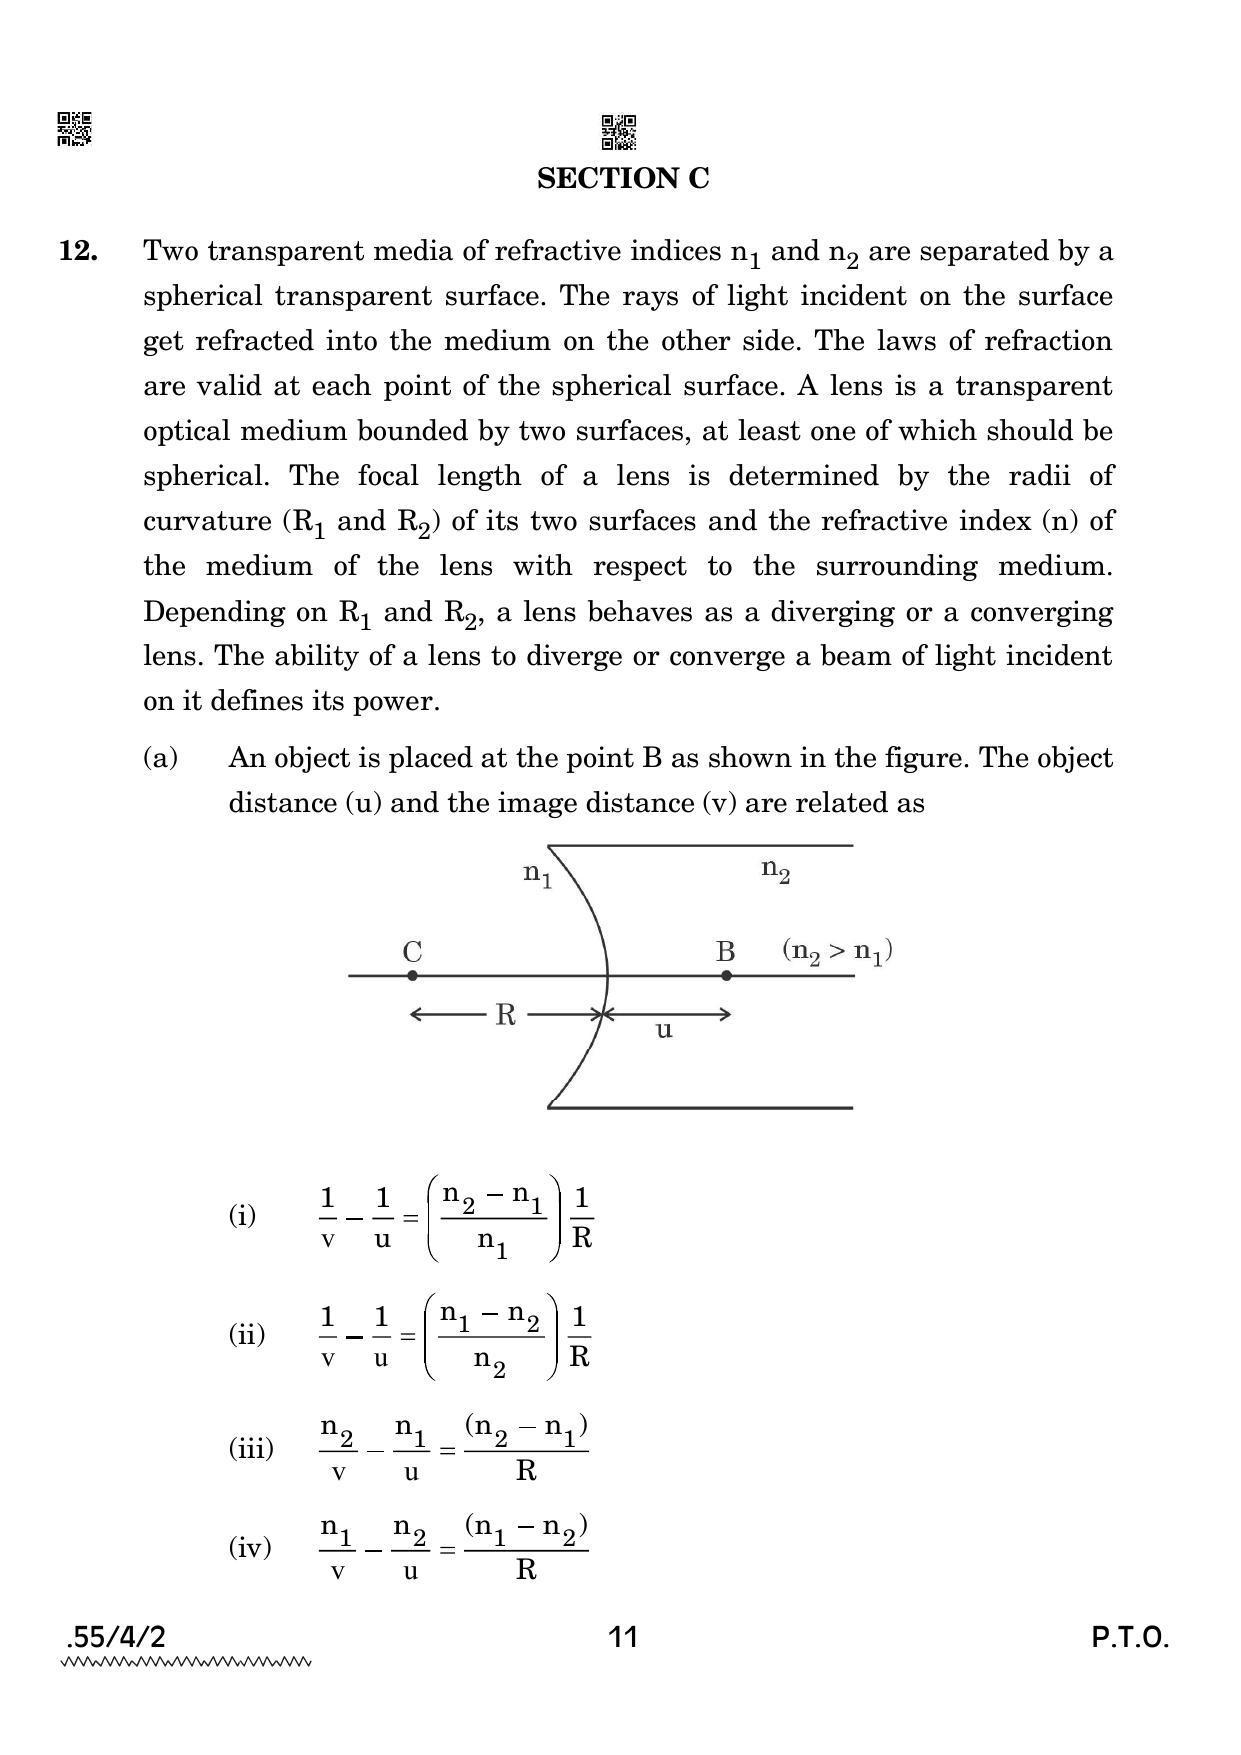 CBSE Class 12 55-4-2 Physics 2022 Question Paper - Page 11